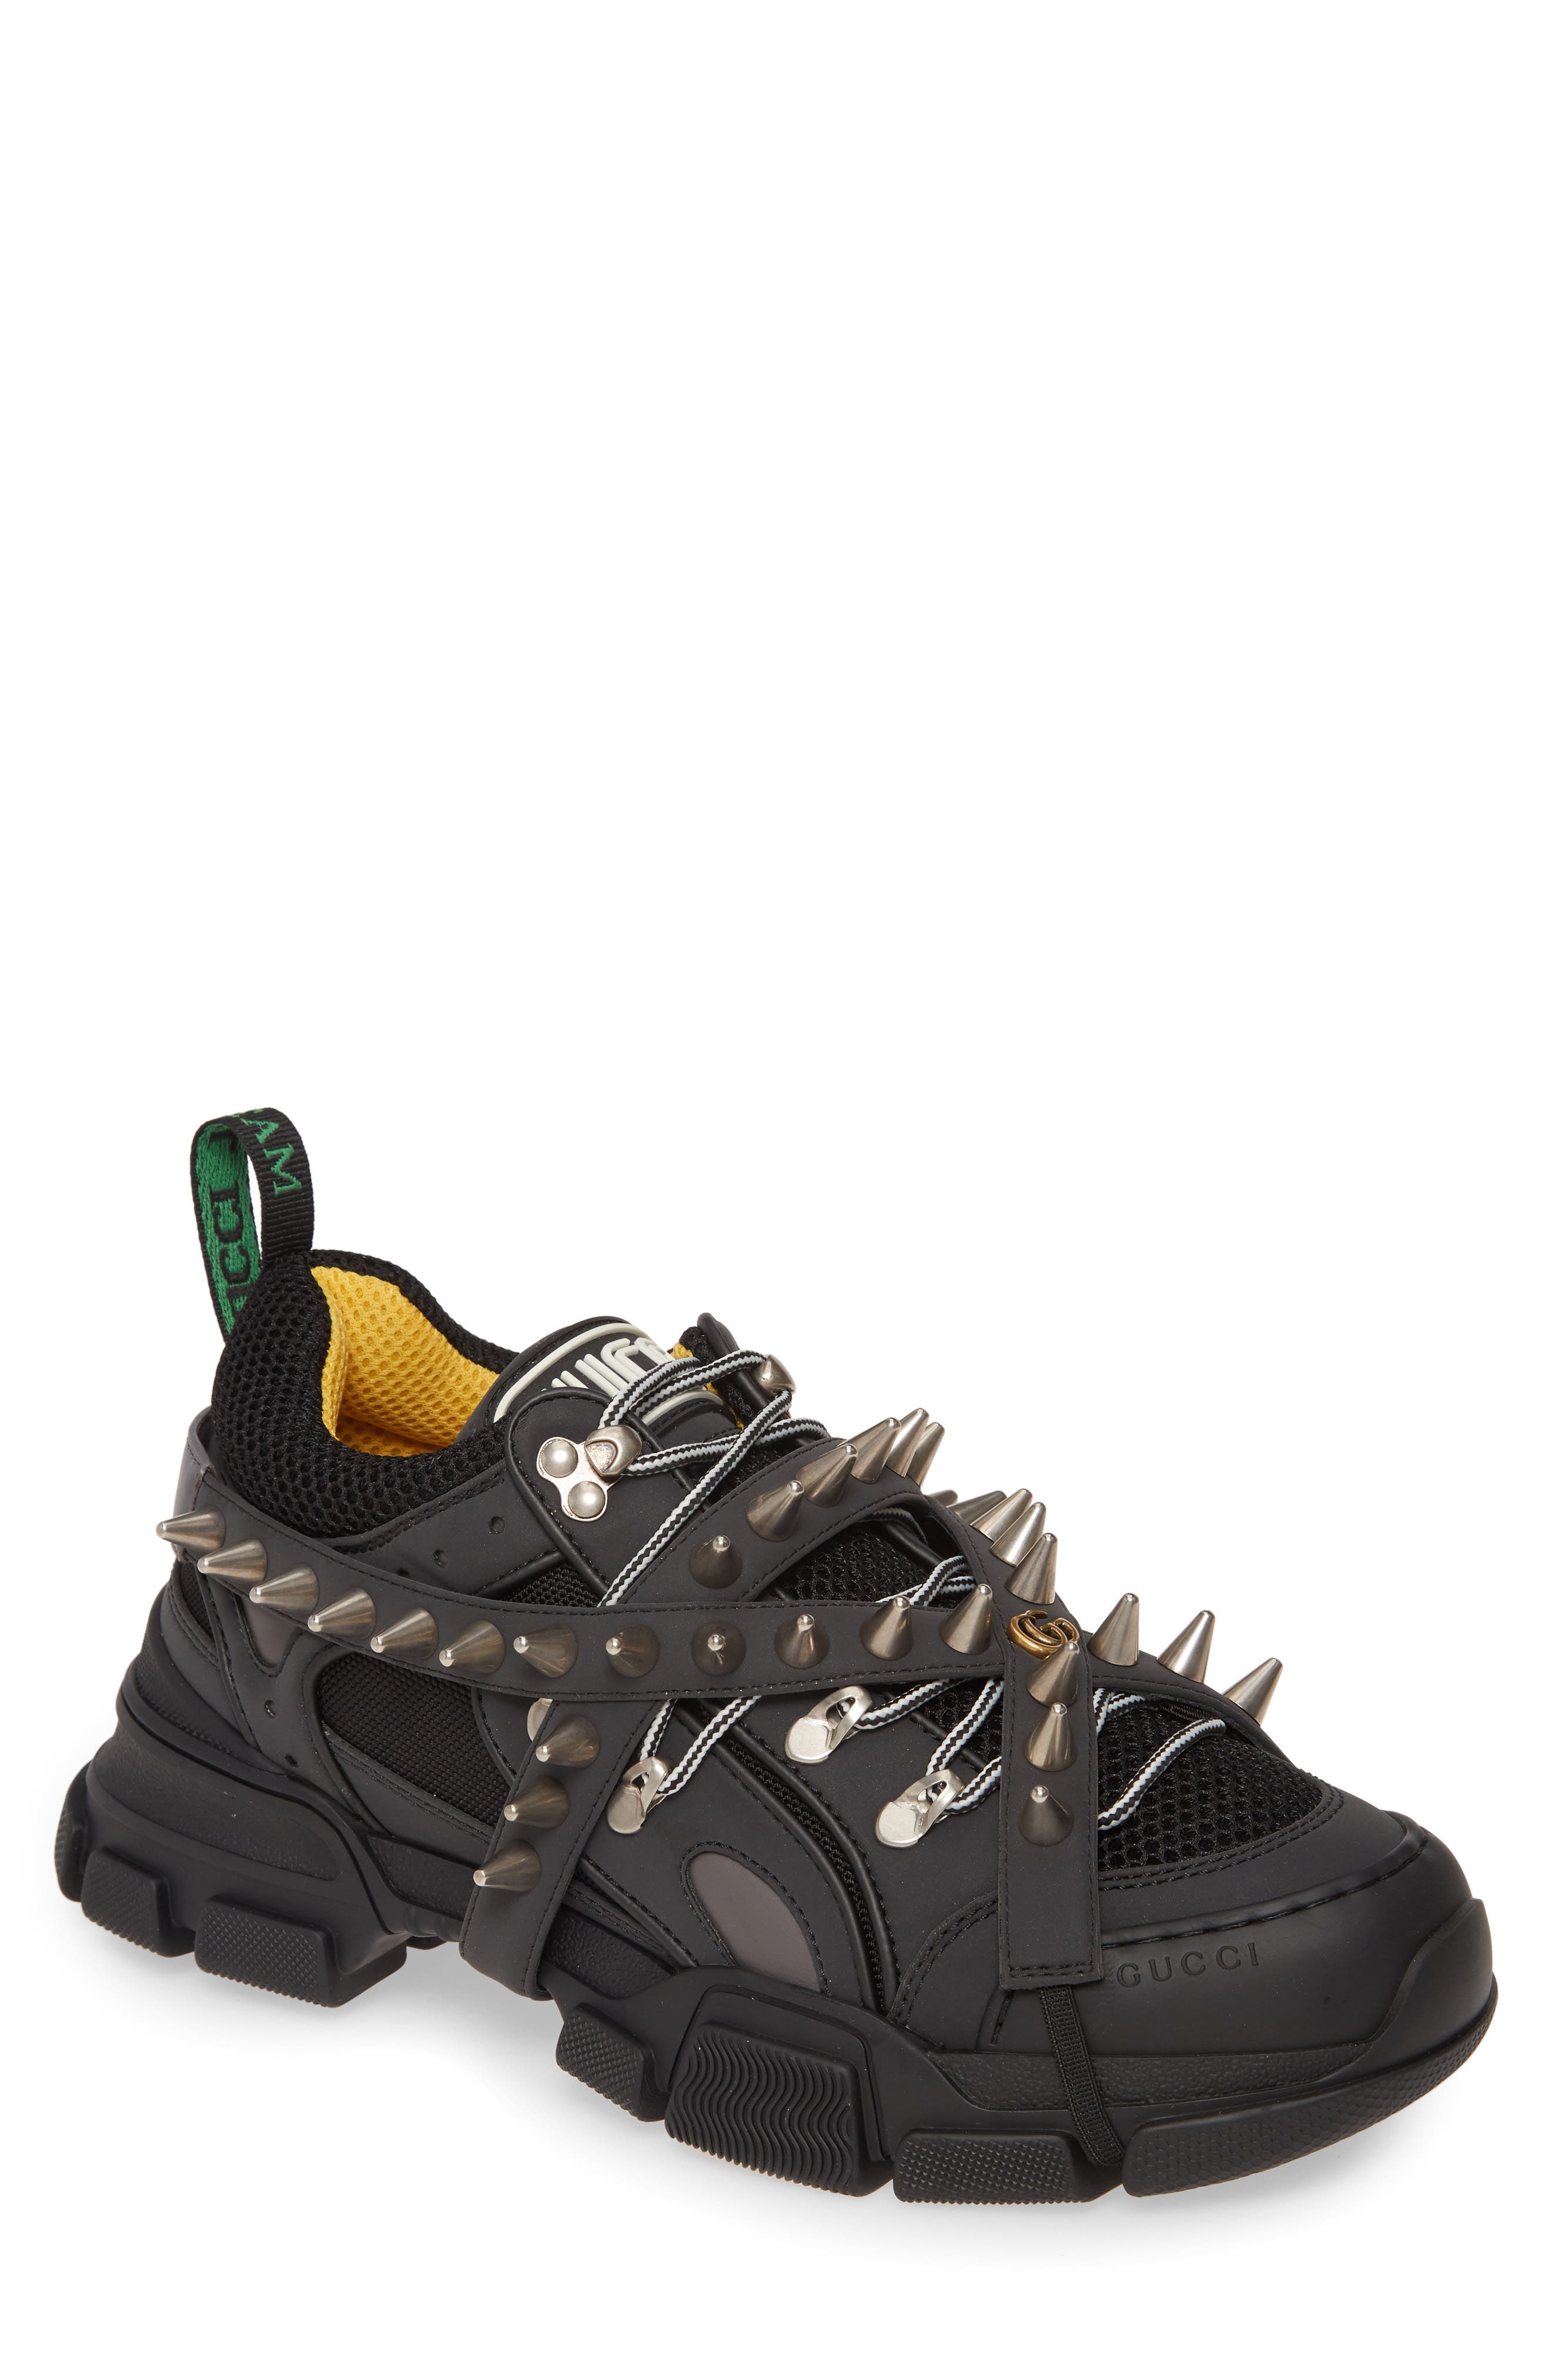 gucci mens studded shoes